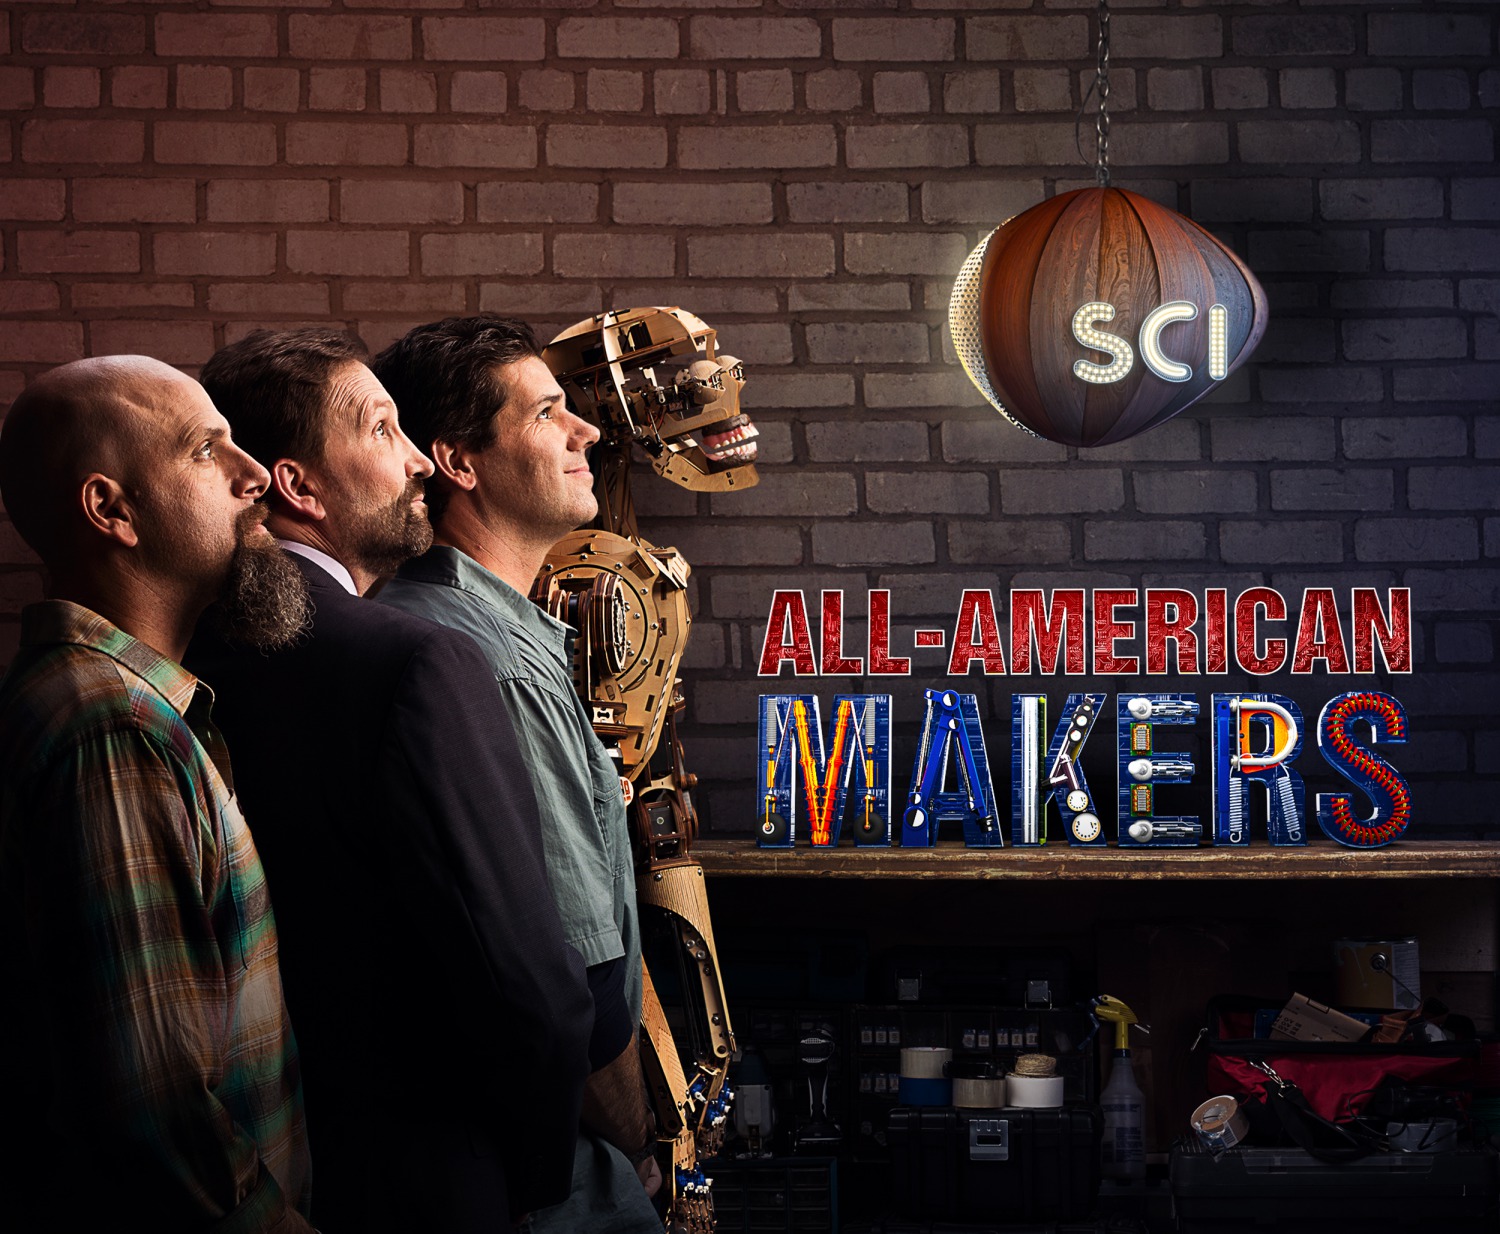 Extra Large TV Poster Image for All-American Makers 